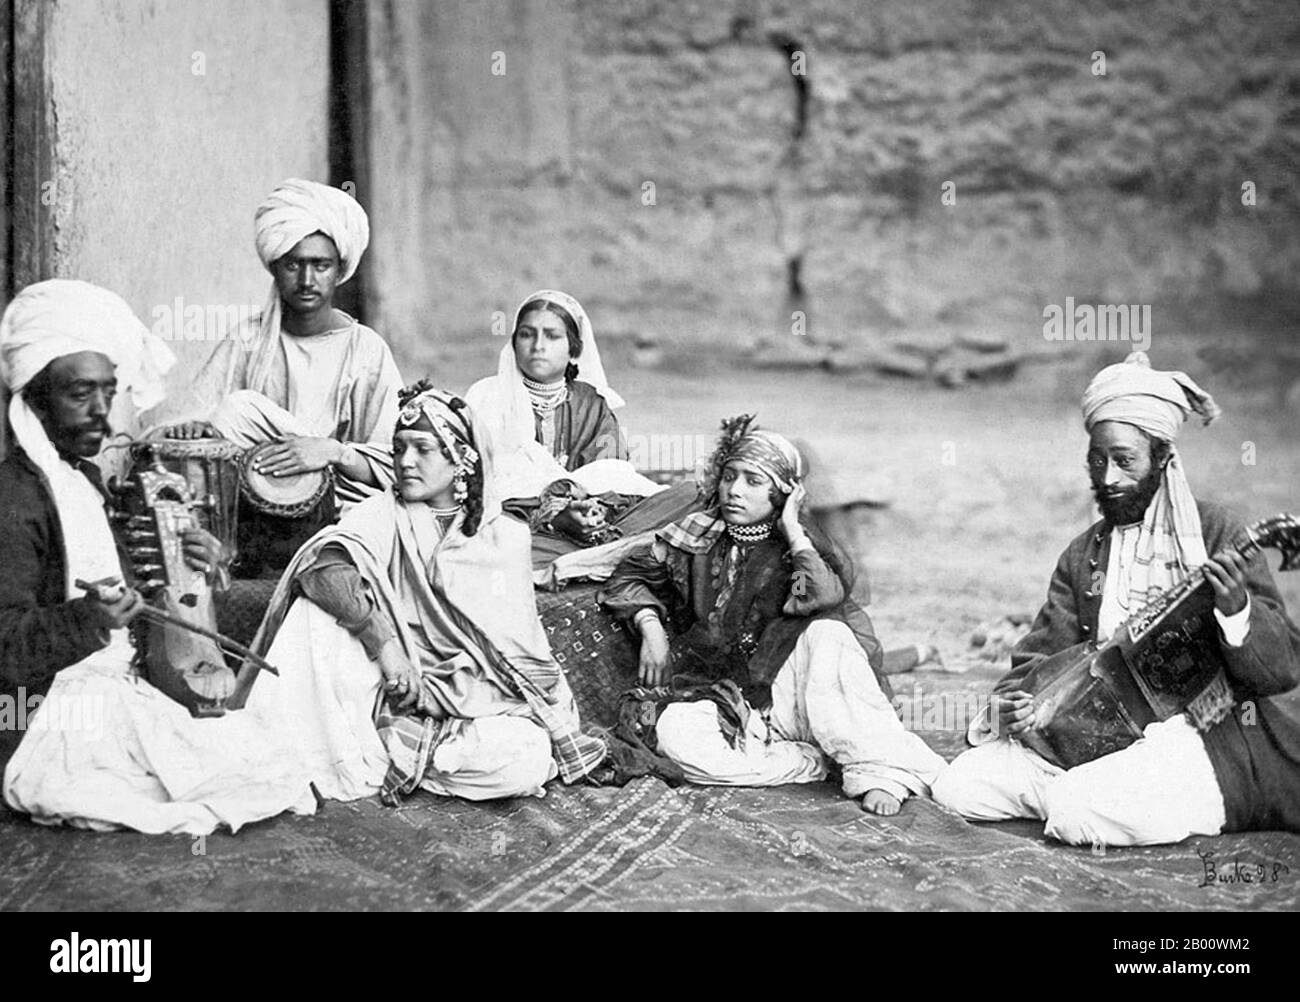 Afghanistan: Three nautch girls with musicians, taken at Kabul in Afghanistan by John Burke (1843-1900), c. 1879-1880.  The word Nautch is an anglicized version of nāc, a word found in Hindi and Urdu and several other languages of North India, derived from the Sanskrit, Nritya, via the Prakrit, Nachcha. A simple and literal translation of Nautch is 'dance' or 'dancing'.  The culture of the performing art of Nautch rose to prominence during the later period of Mughal Empire, and the East India Company Rule. Stock Photo